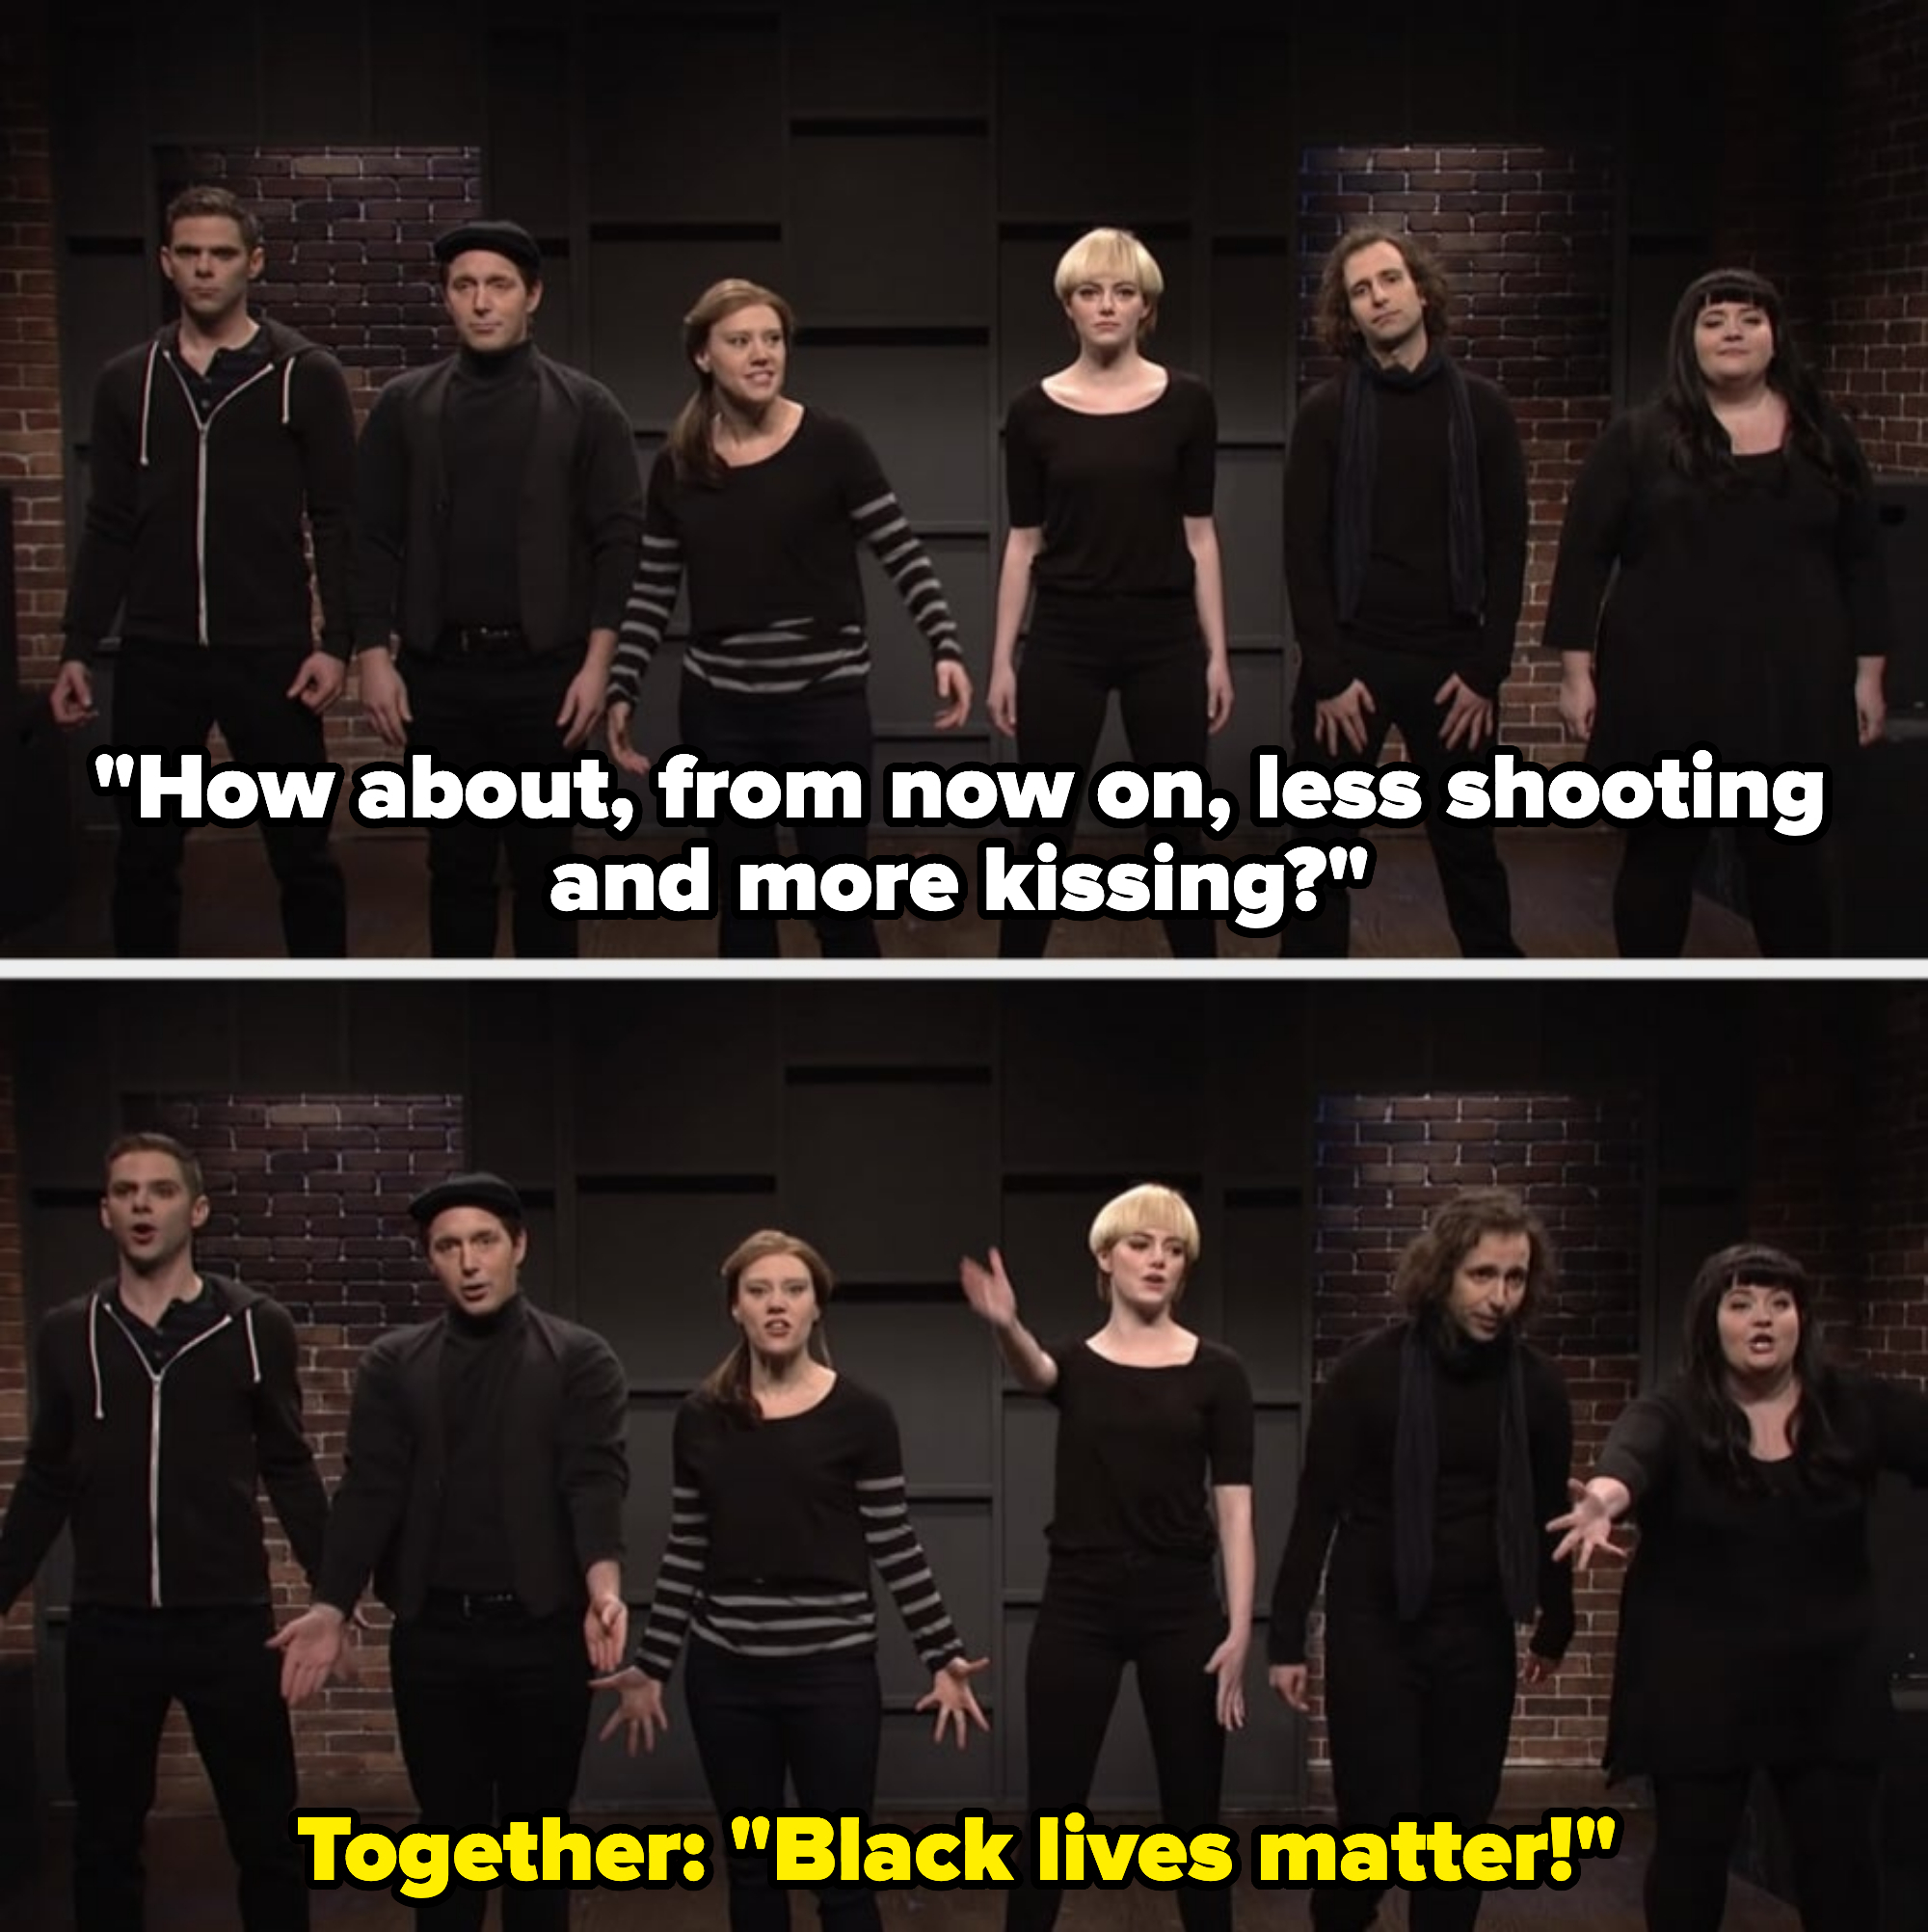 Theatre students say &quot;black lives matter&quot; at an inappropriate time